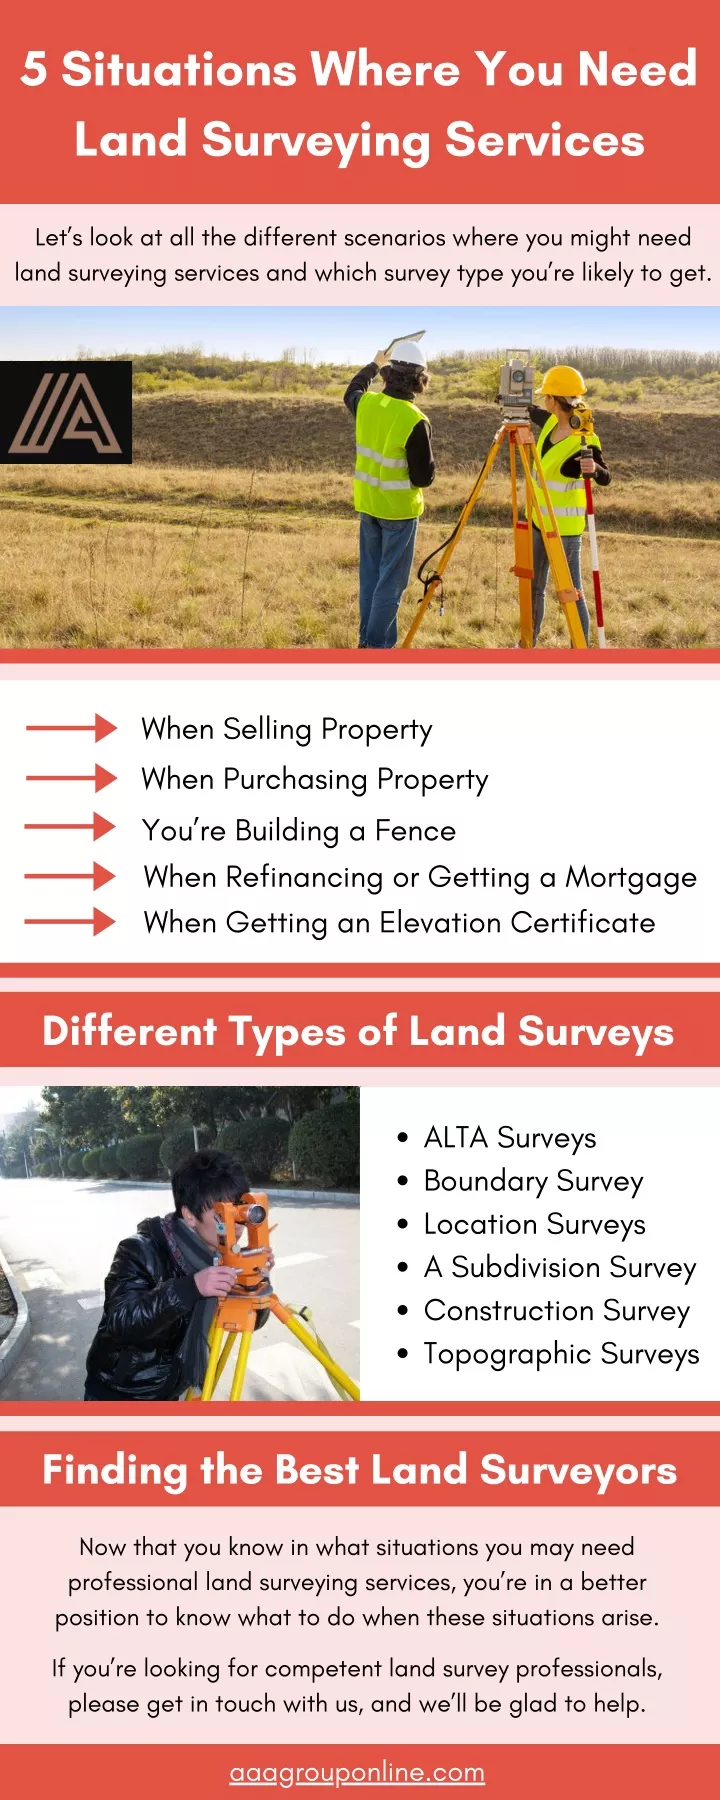 5 situations where you need land surveying